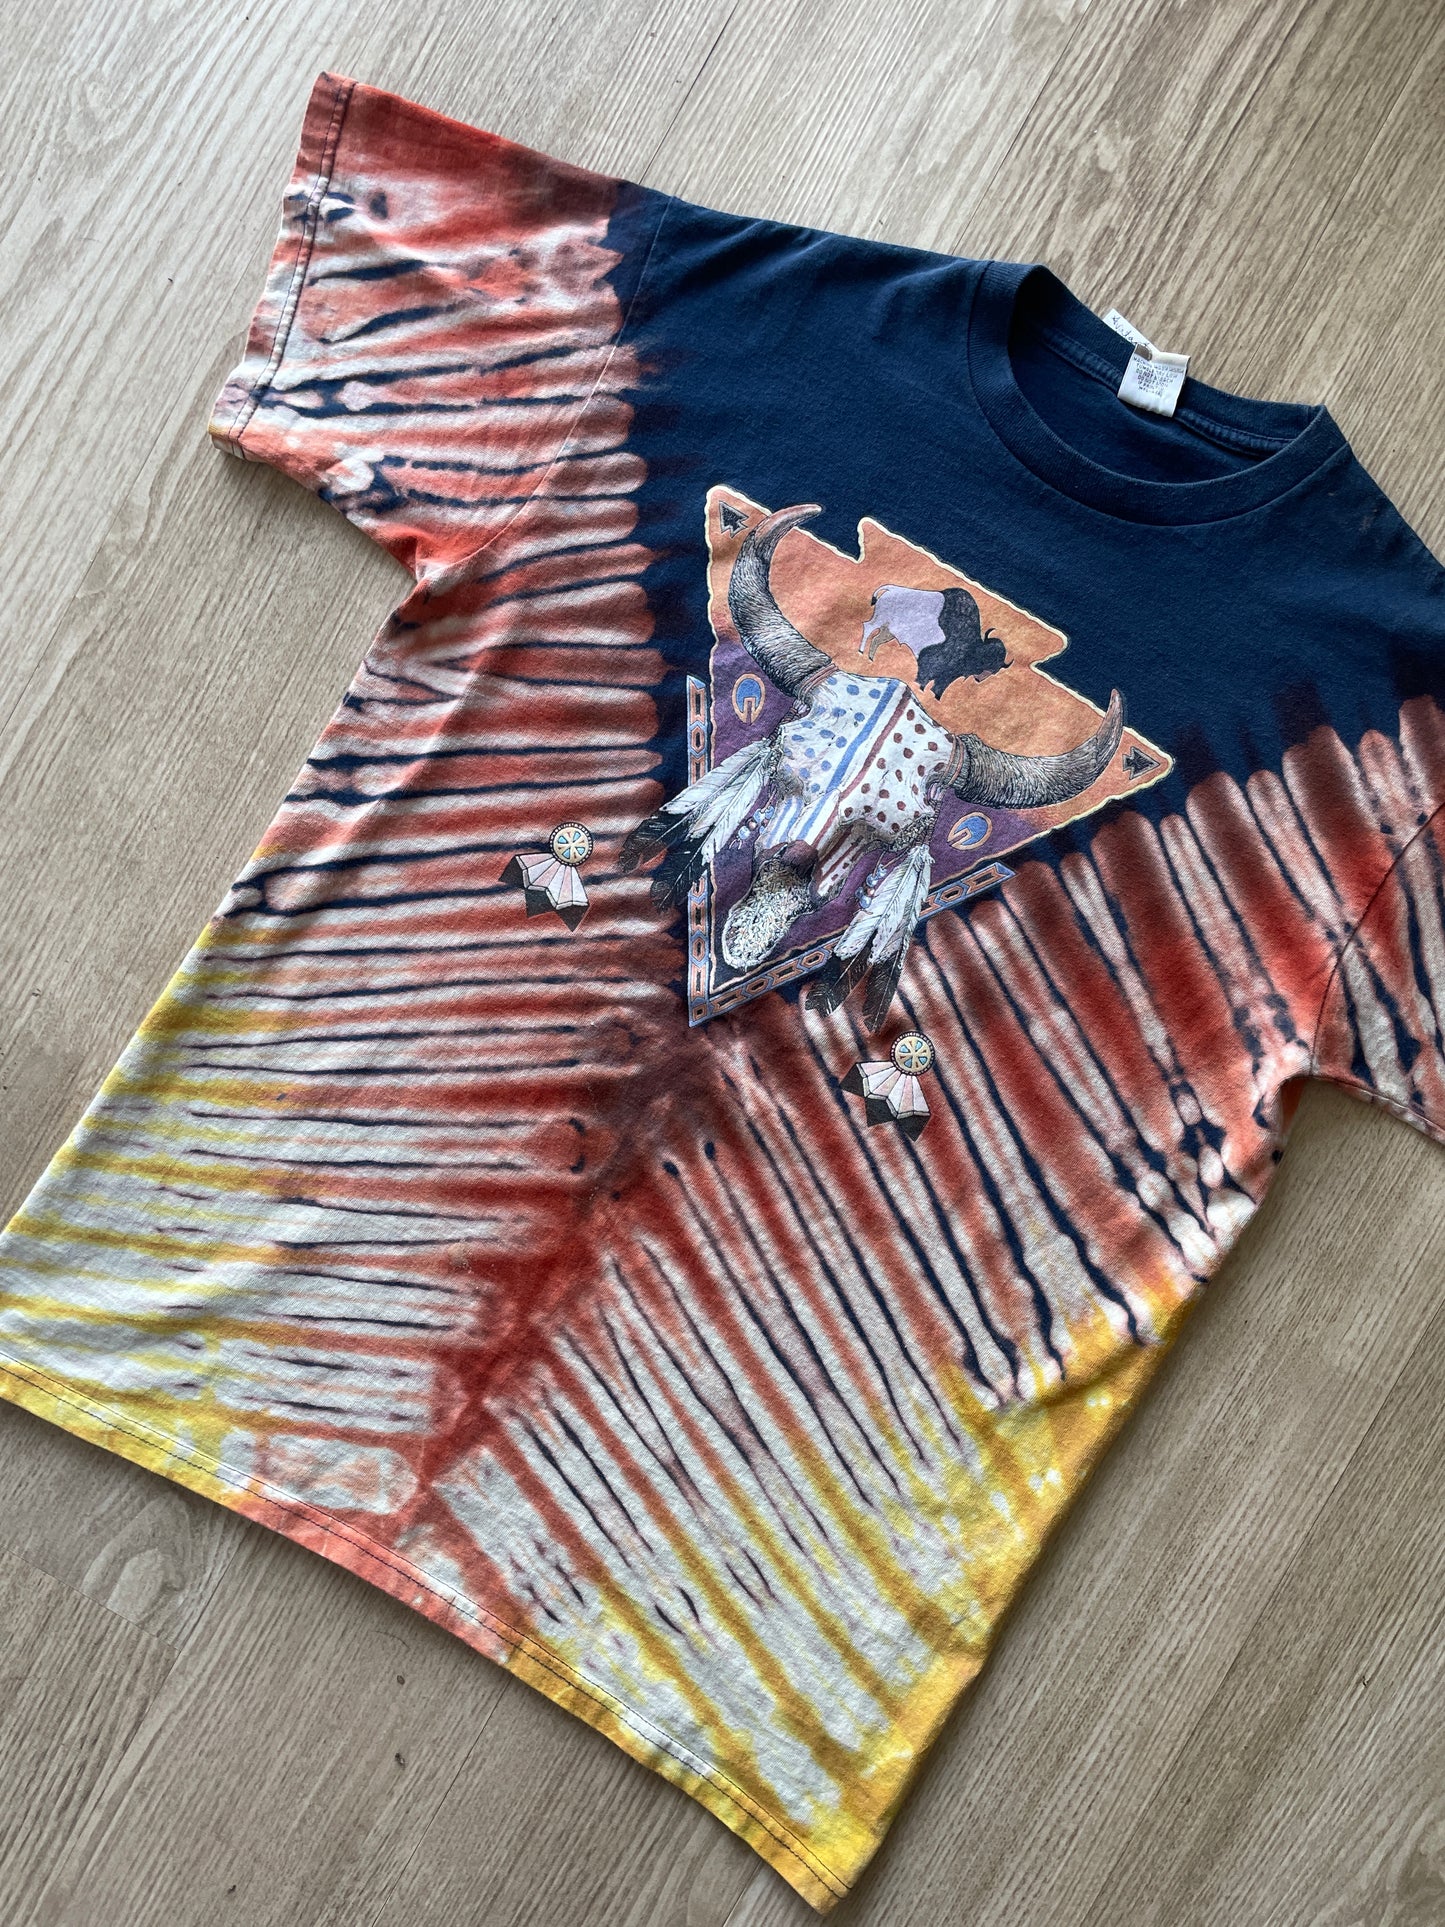 MEDIUM Men’s Vintage Levi's Western Cow Skull Handmade Reverse Tie Dye Short Sleeve T-Shirt | One-Of-a-Kind Upcycled Navy Blue, Brown, and Yellow Desert Tones Tie Dye Top